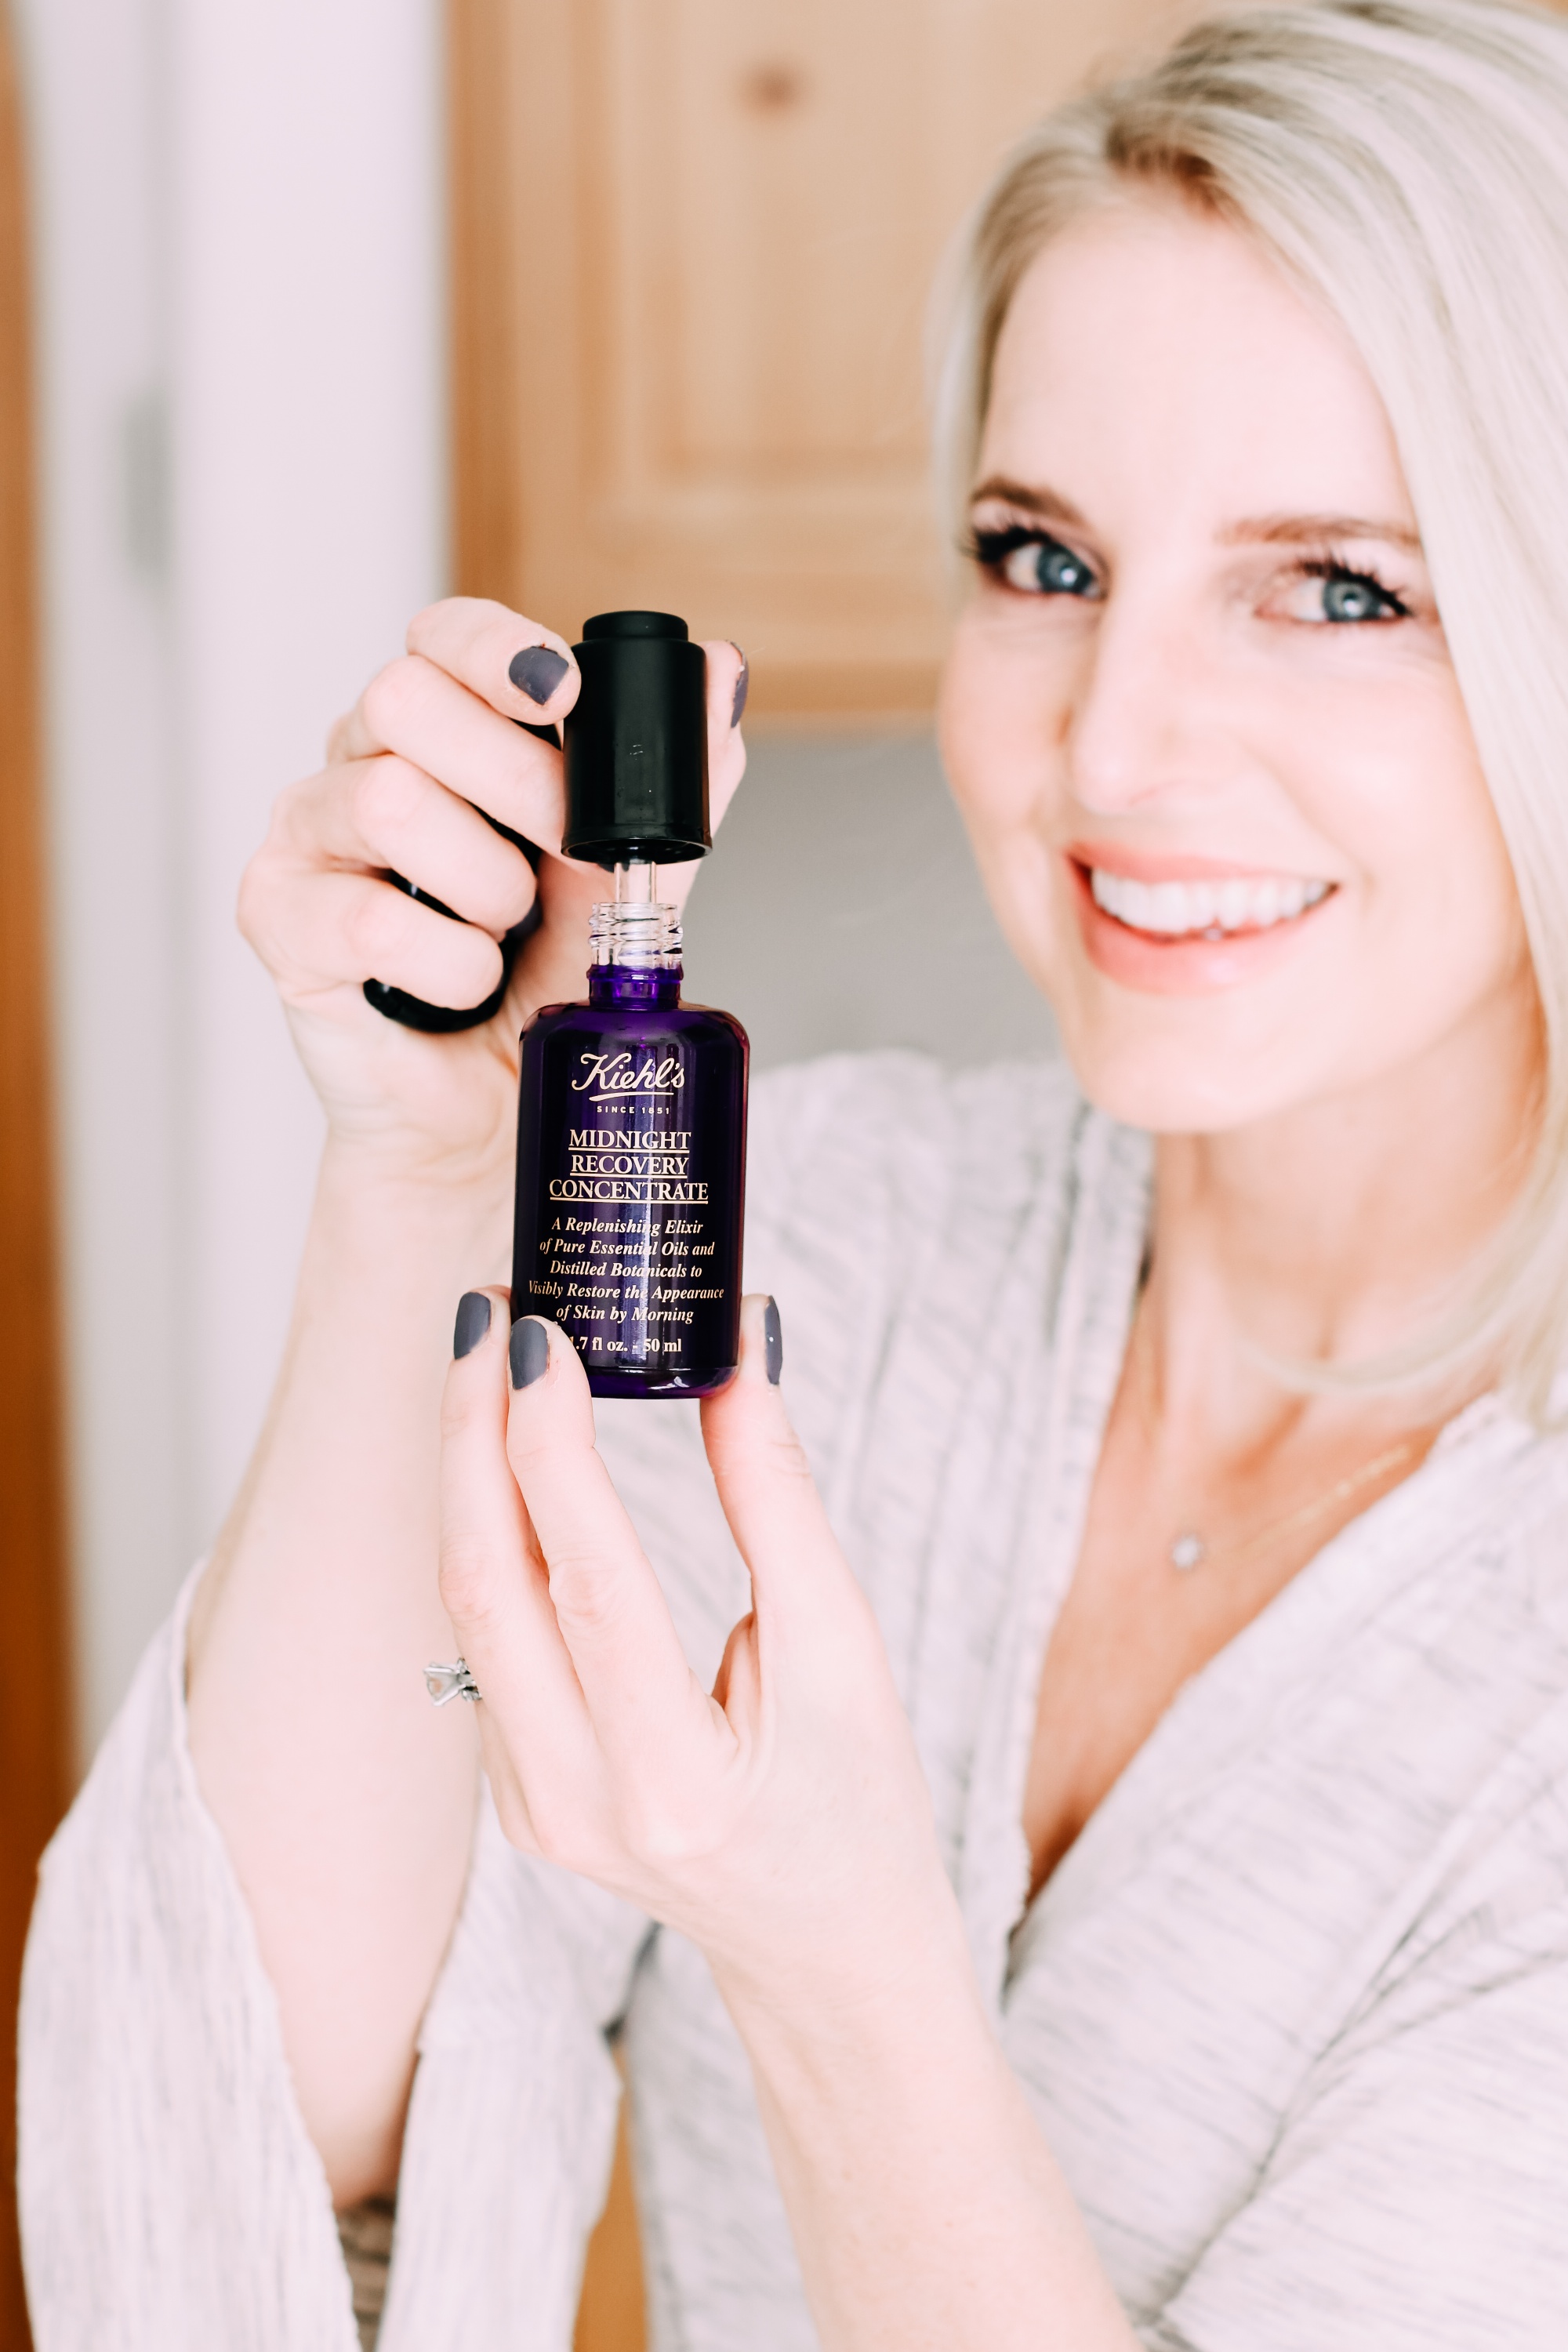 Skincare Gifts, Erin busbee of Busbee Style holding the Midnight Recovery Concentrate Face Oil by Kiehl's from Nordstrom wearing a gray robe in Telluride, Colorado